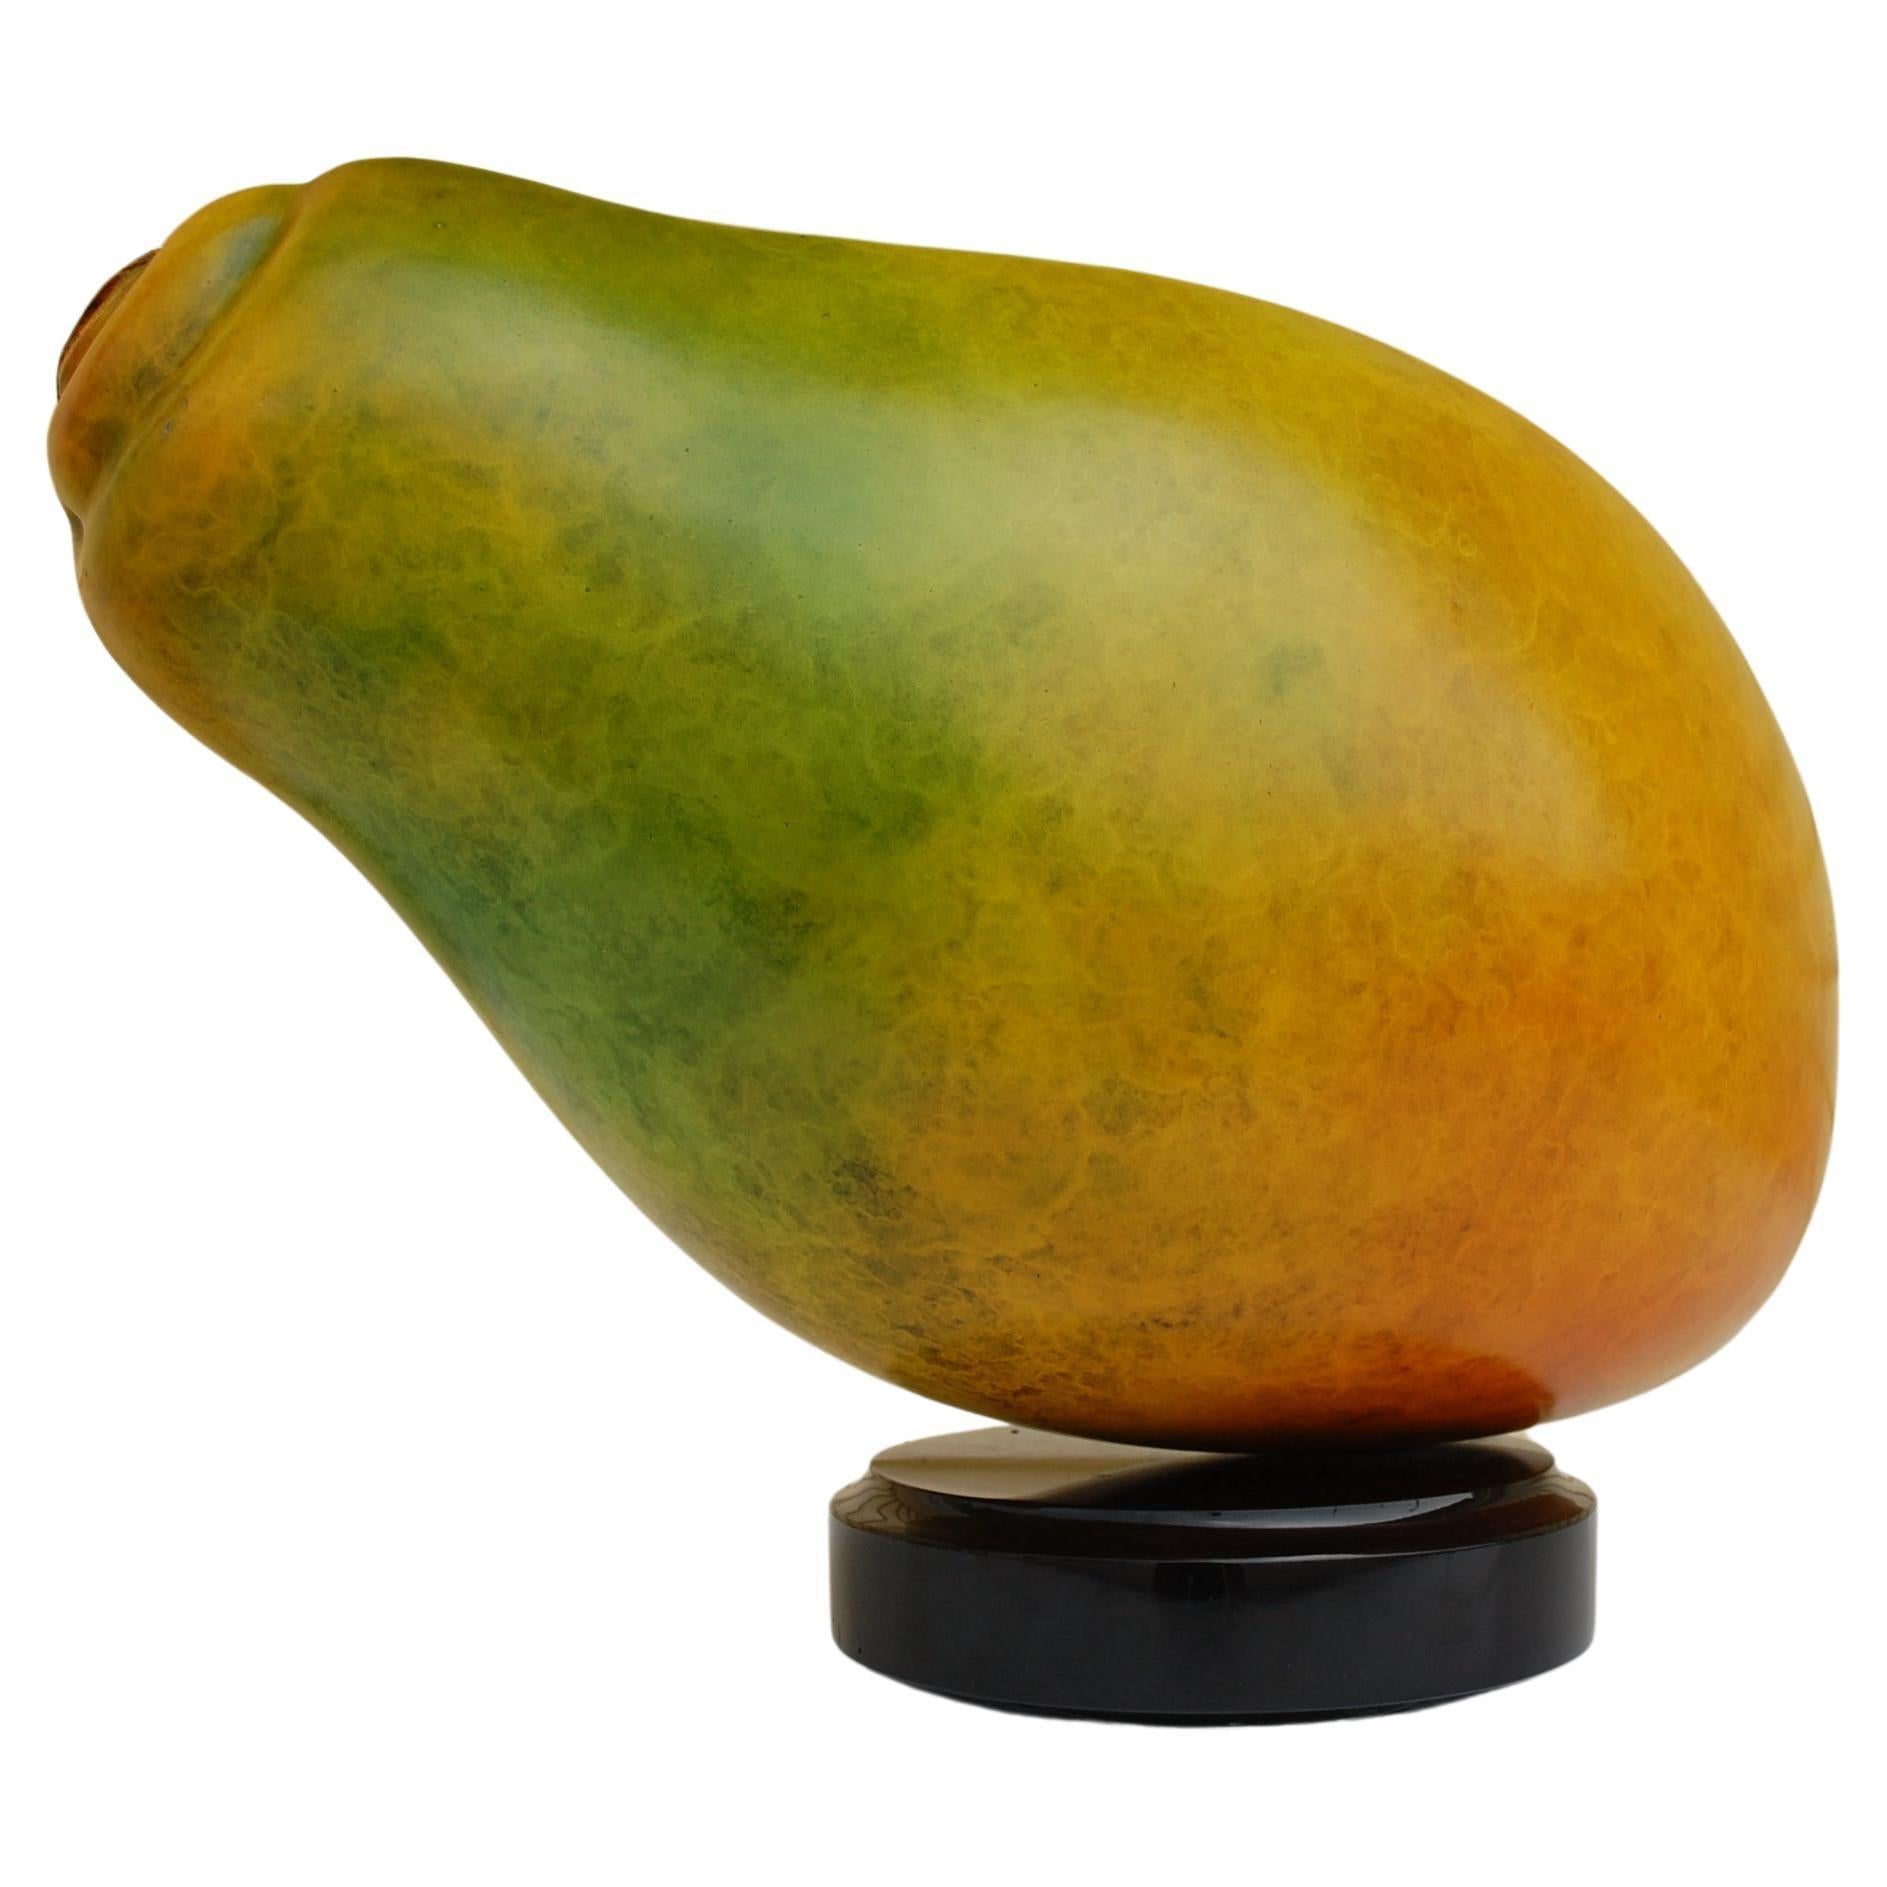  Papaya Still Life Bronze Sculpture
Artist signed only 1 made, patinated bronze on black marble base 8